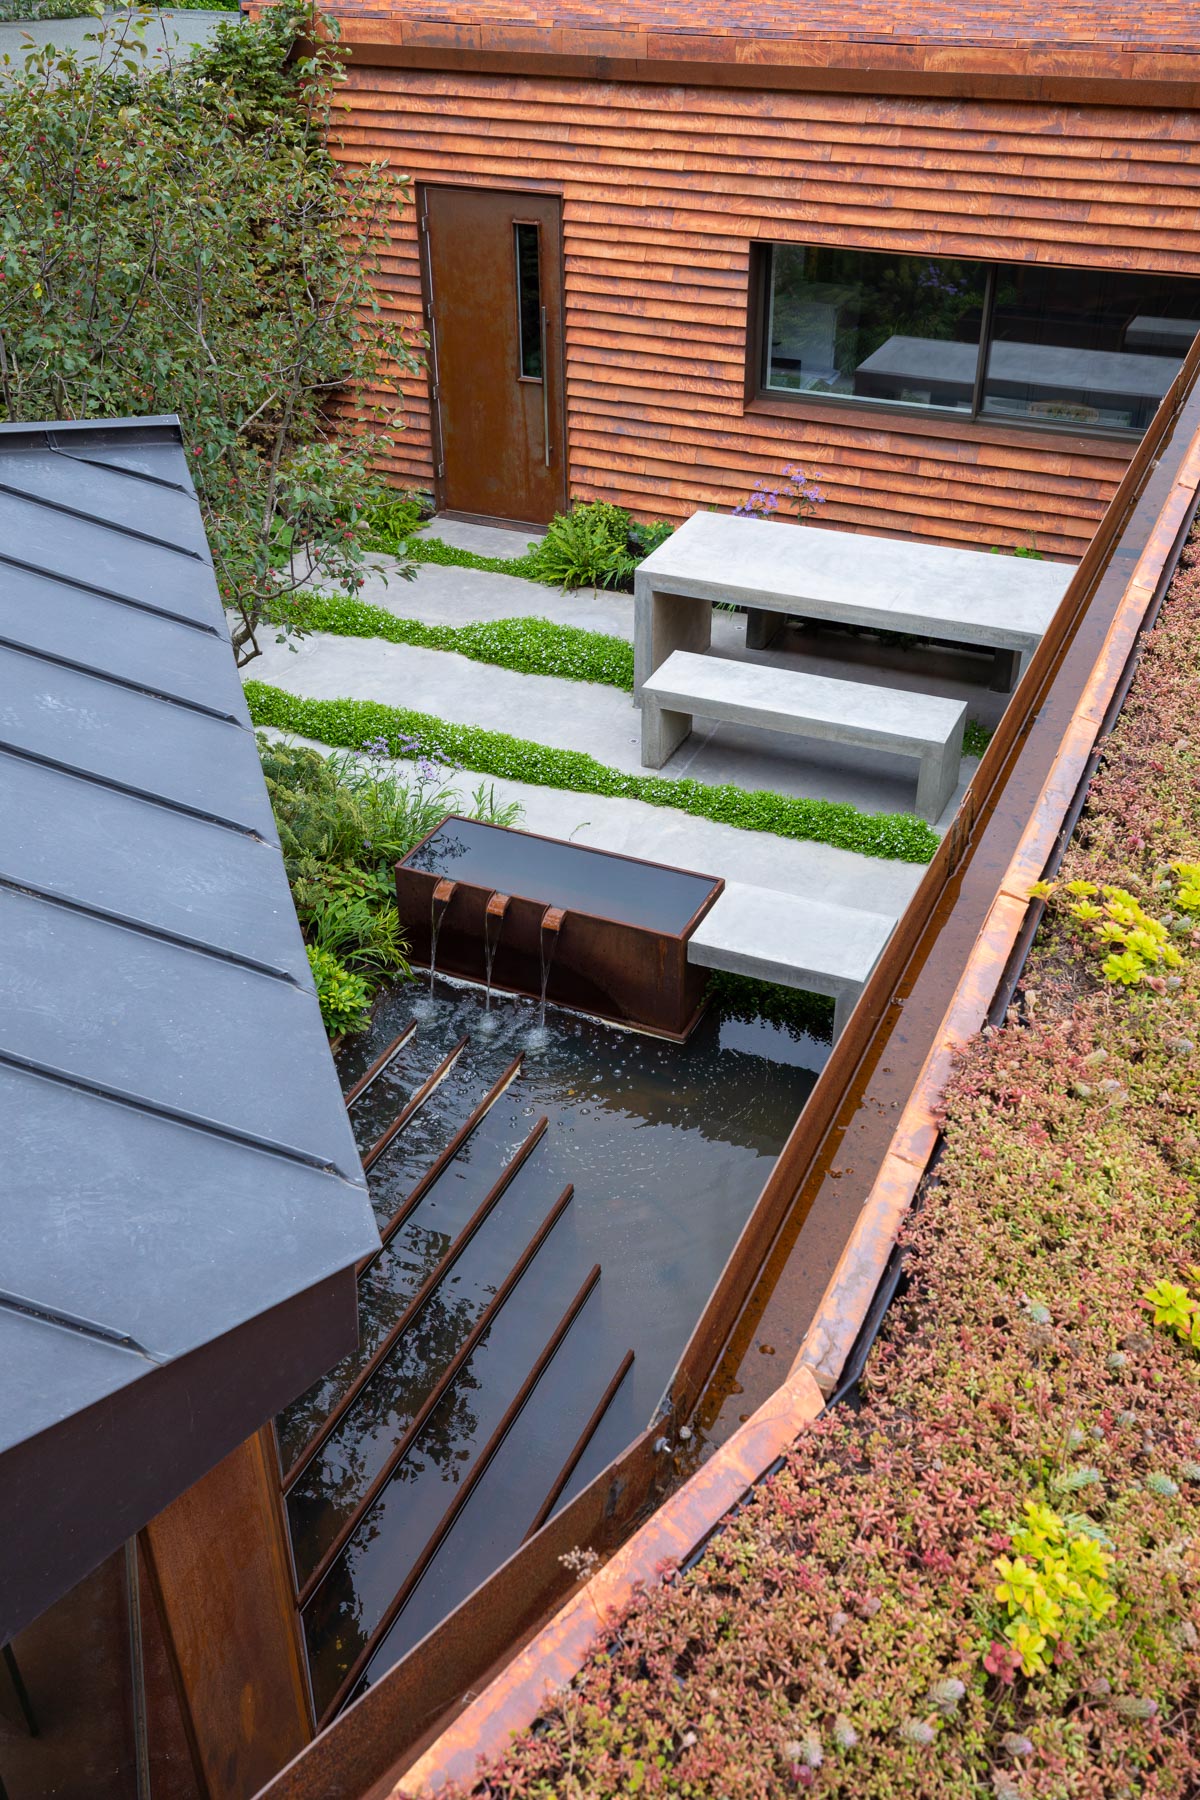 Colm Joseph modern design Cambridge Petersen bricks architecture corten steel water feature concrete table and benches naturalistic planting view from above